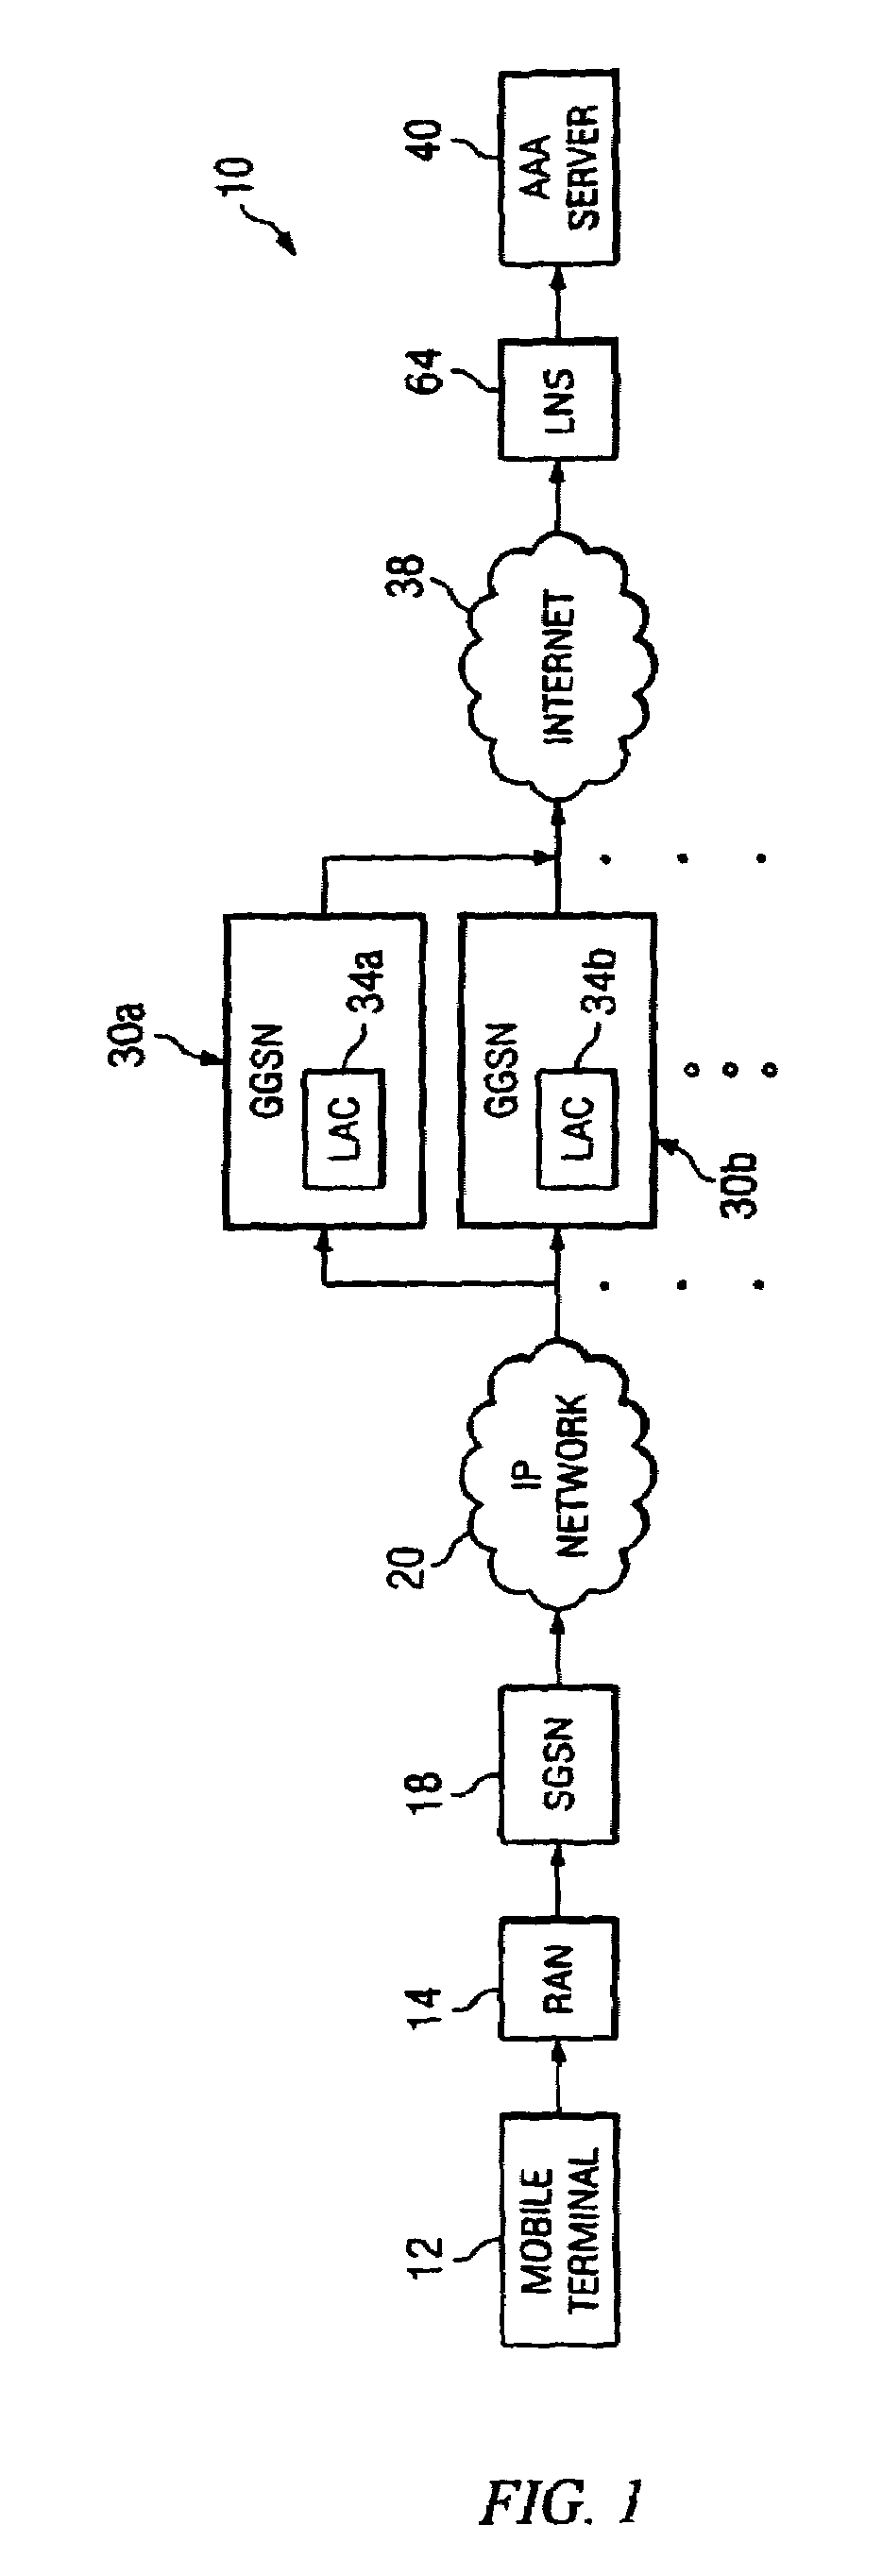 System and method for providing end to end authentication in a network environment